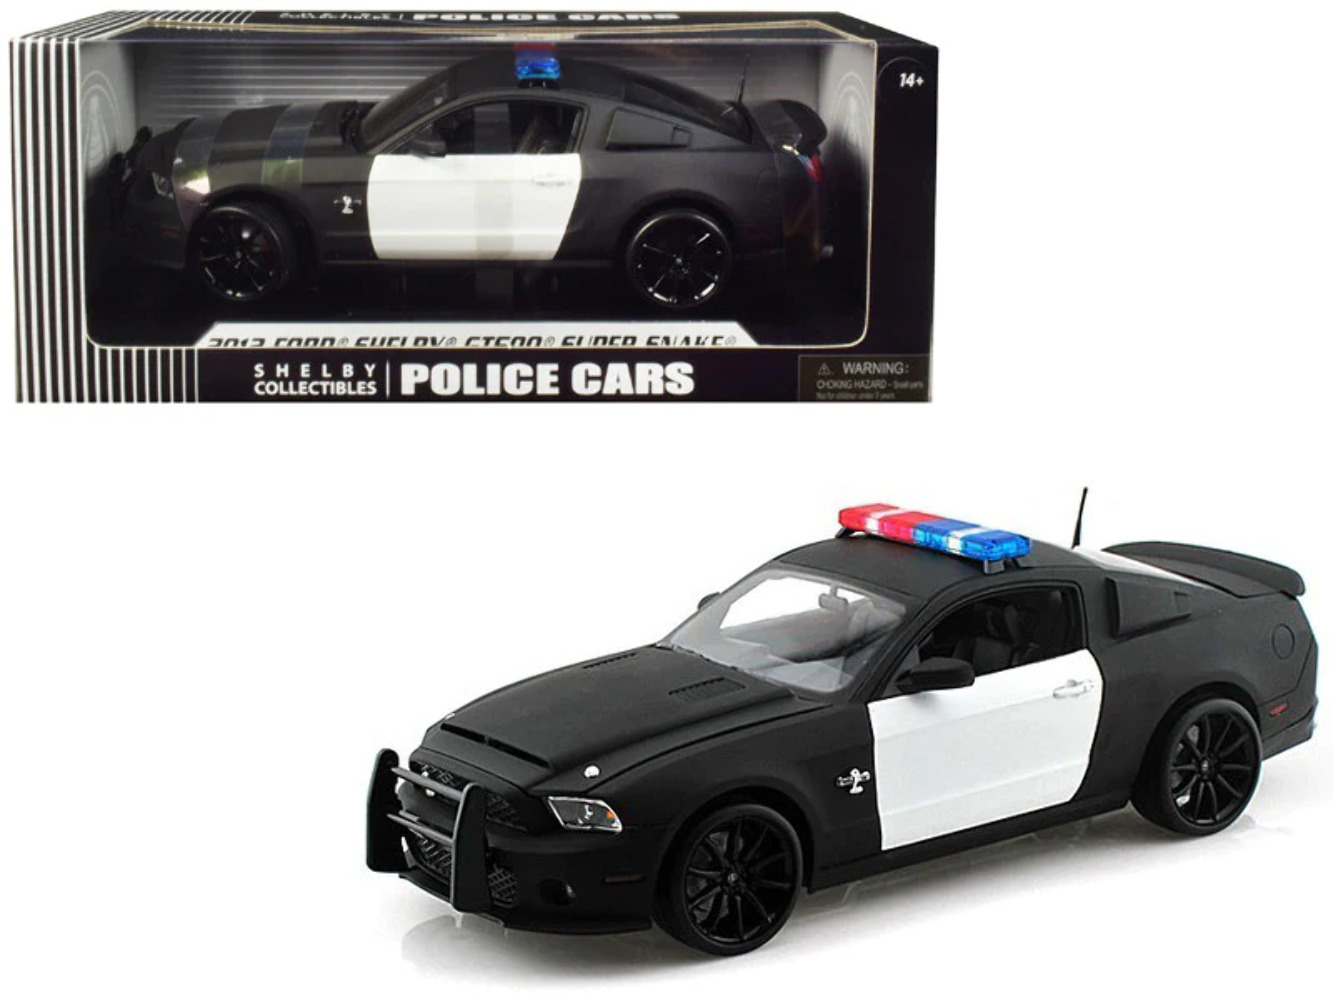 2012 Ford Shelby Mustang GT500 Super Snake Unmarked Police Car Black/White 1/18